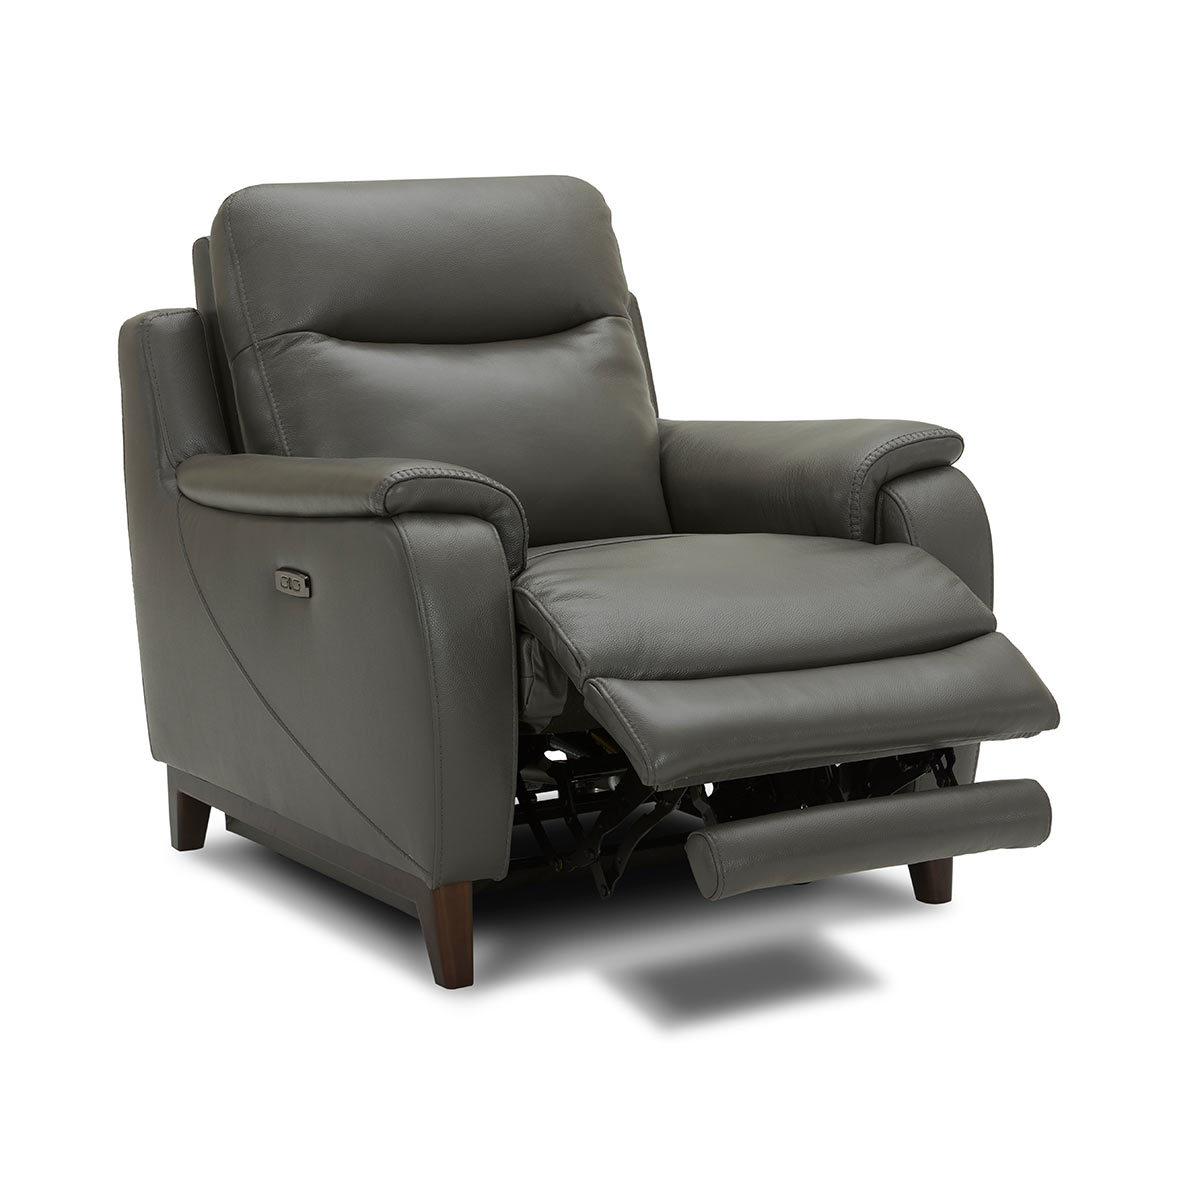 Cut out image of Kuka Leather Power Armchair reclined